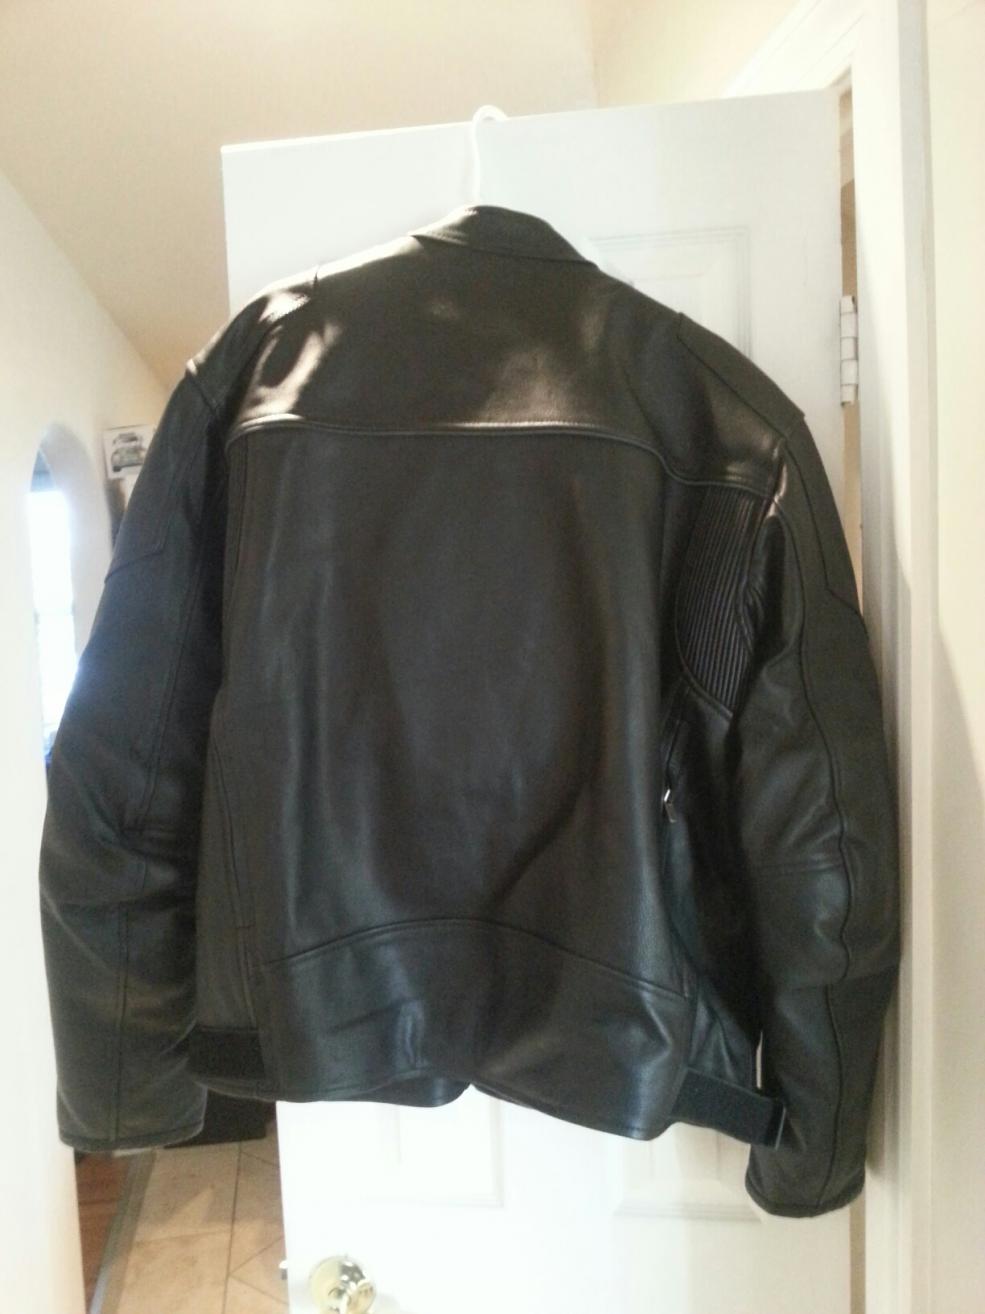 River Road Mesa Armored Leather Jacket - Size 48 - Like New condition ...